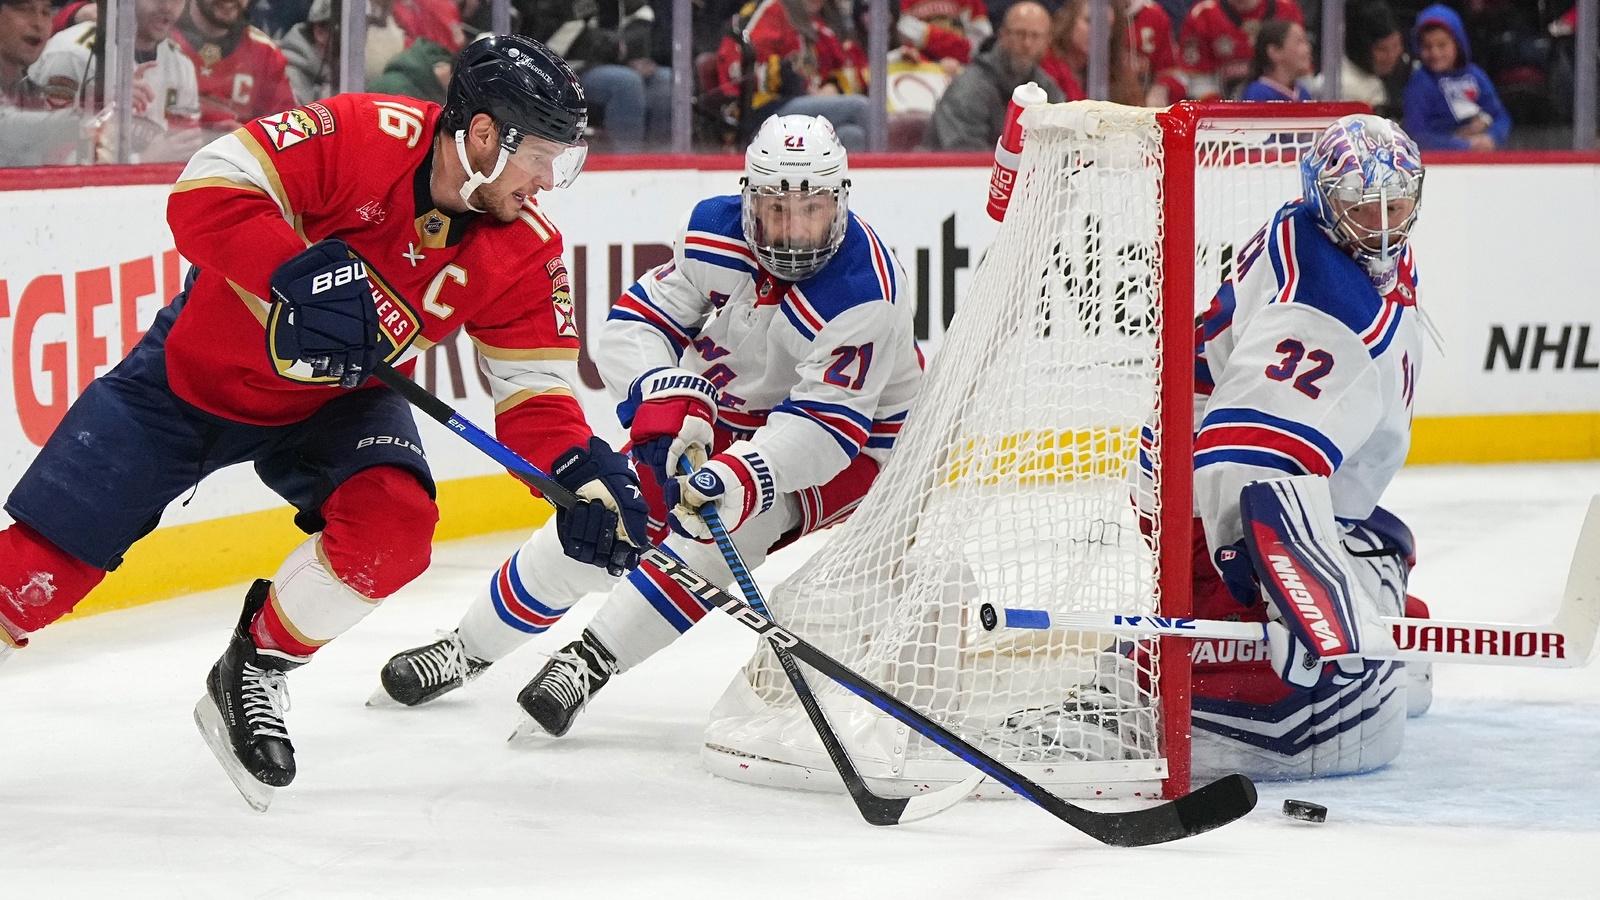 Florida Panthers center Aleksander Barkov (16) passes the puck away from New York Rangers center Barclay Goodrow (21) and goaltender Jonathan Quick (32) during the second period at Amerant Bank Arena. / Jasen Vinlove-USA TODAY Sports